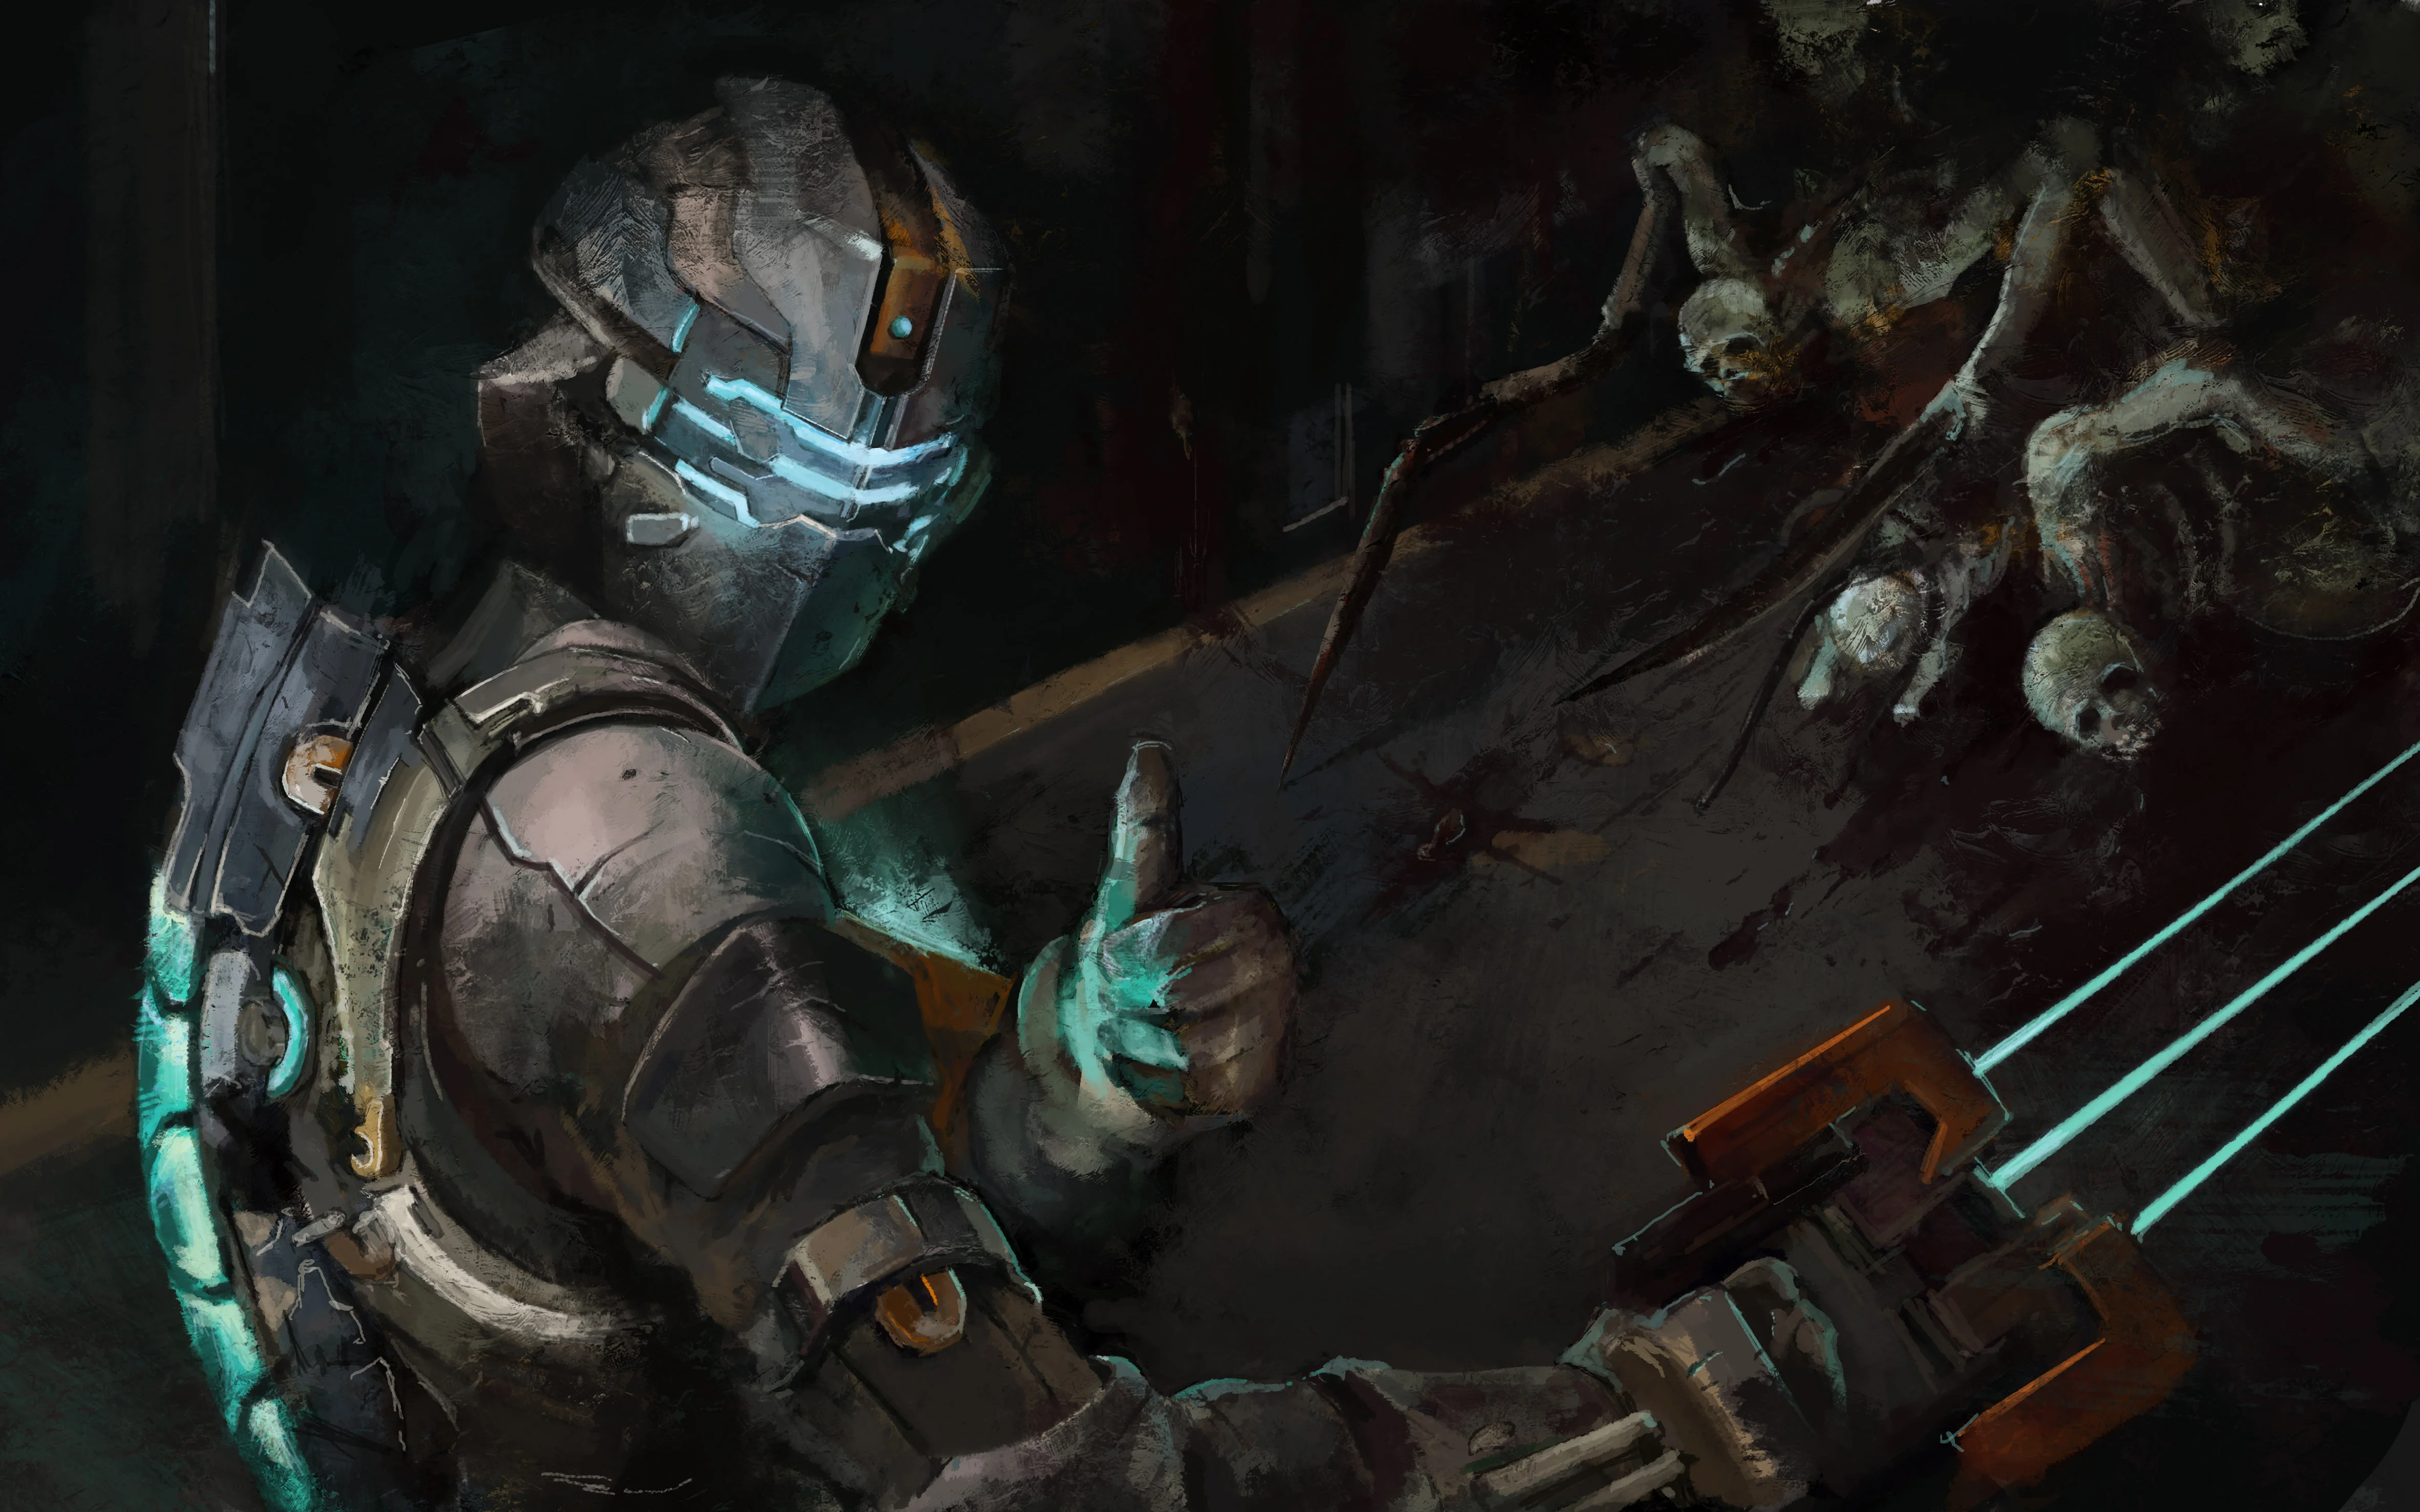 A new secret has been discovered in Dead Space 2. The game came out 13 years ago